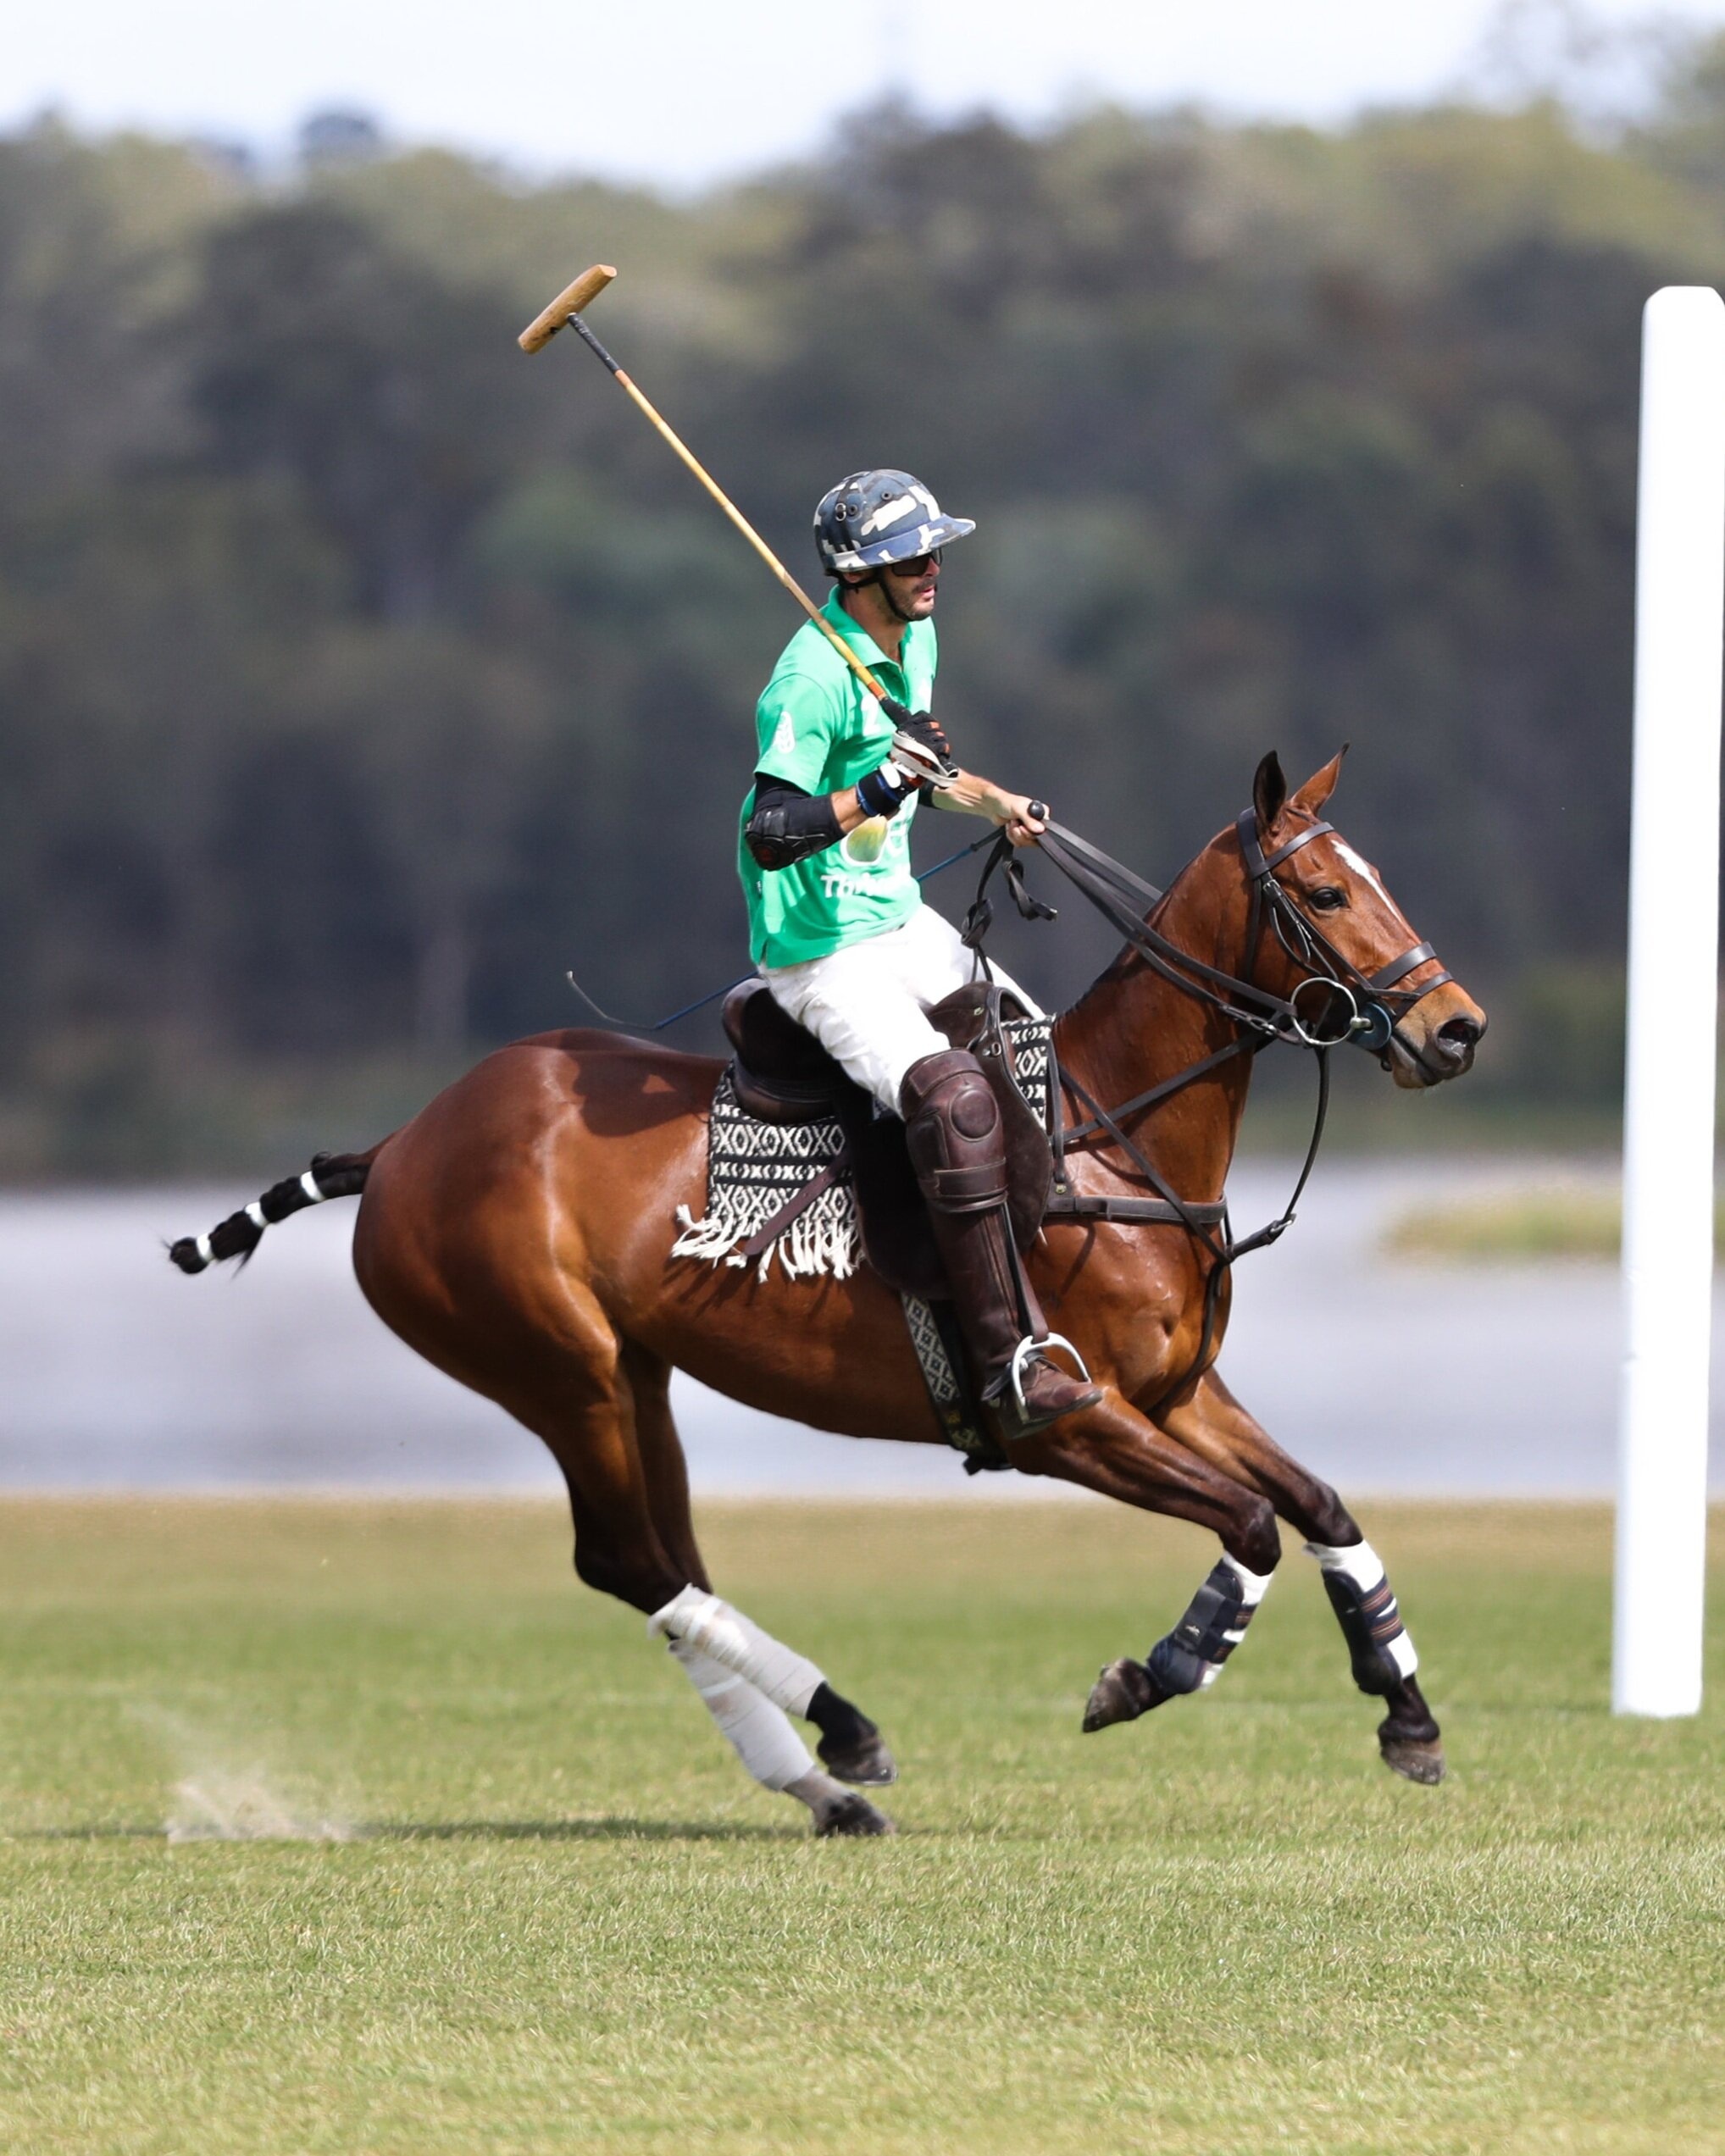 Equestrian Sports: Polo, A horseback ball game, A traditional field sport and one of the world's oldest known team sports. 2040x2550 HD Background.